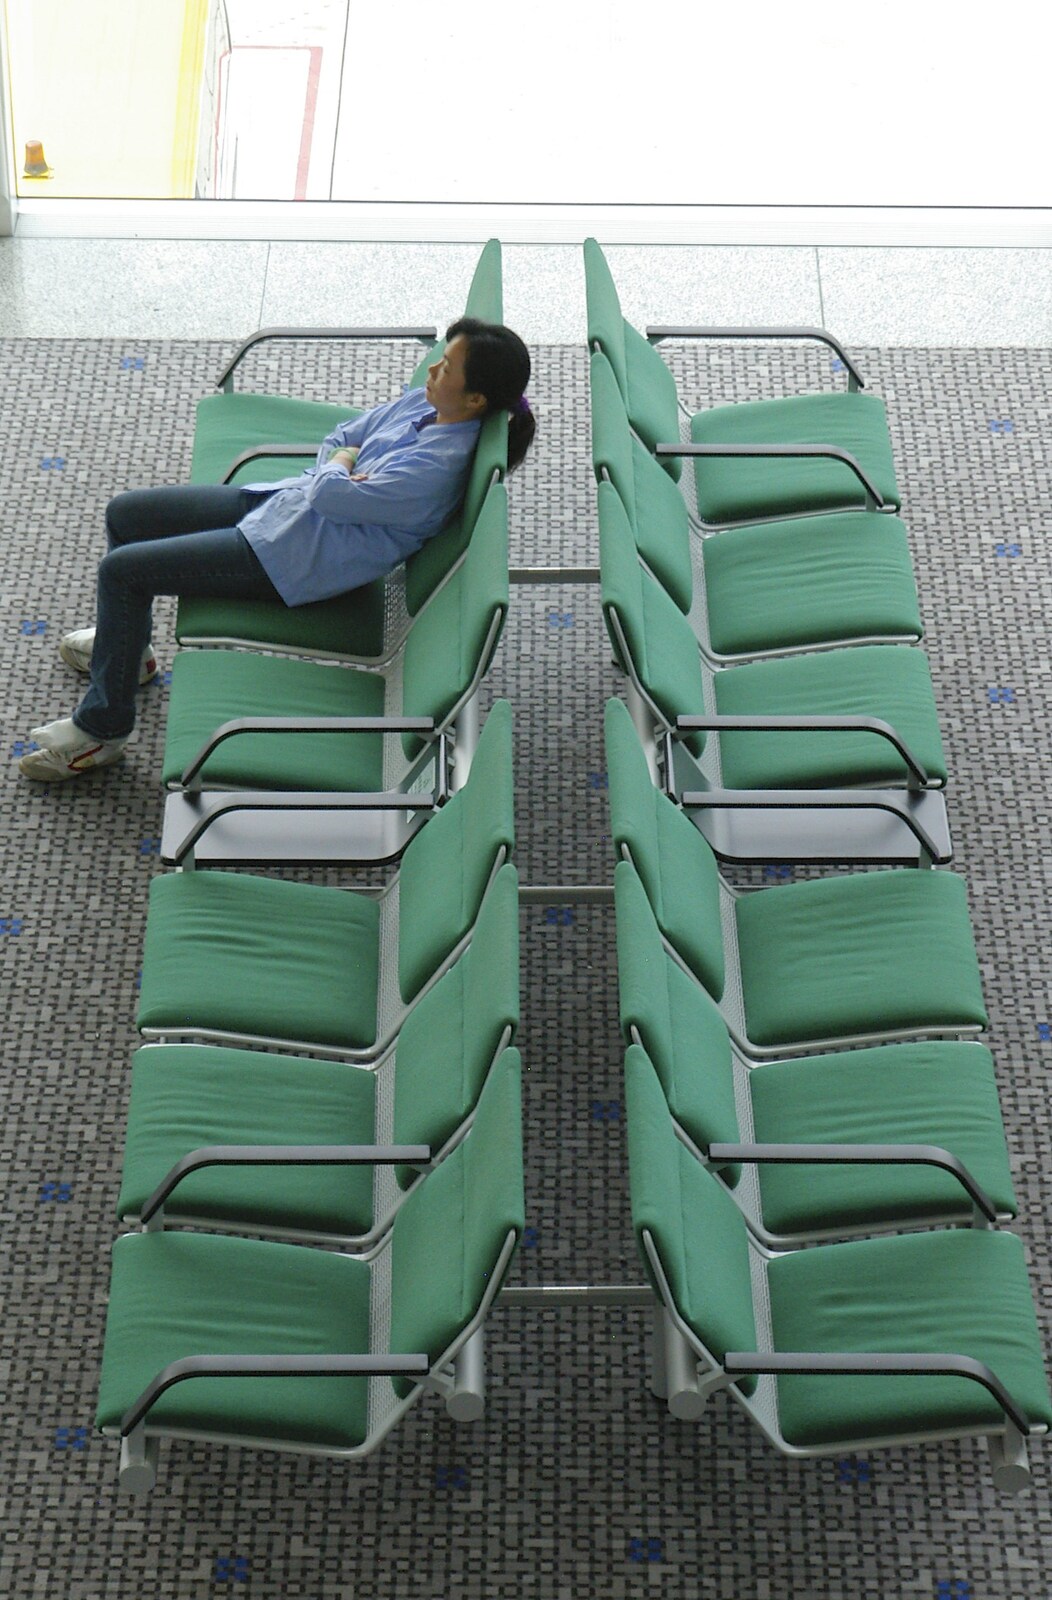 A lone traveller waits at the airport from A Few Days in Nanjing, Jiangsu Province, China - 7th October 2006